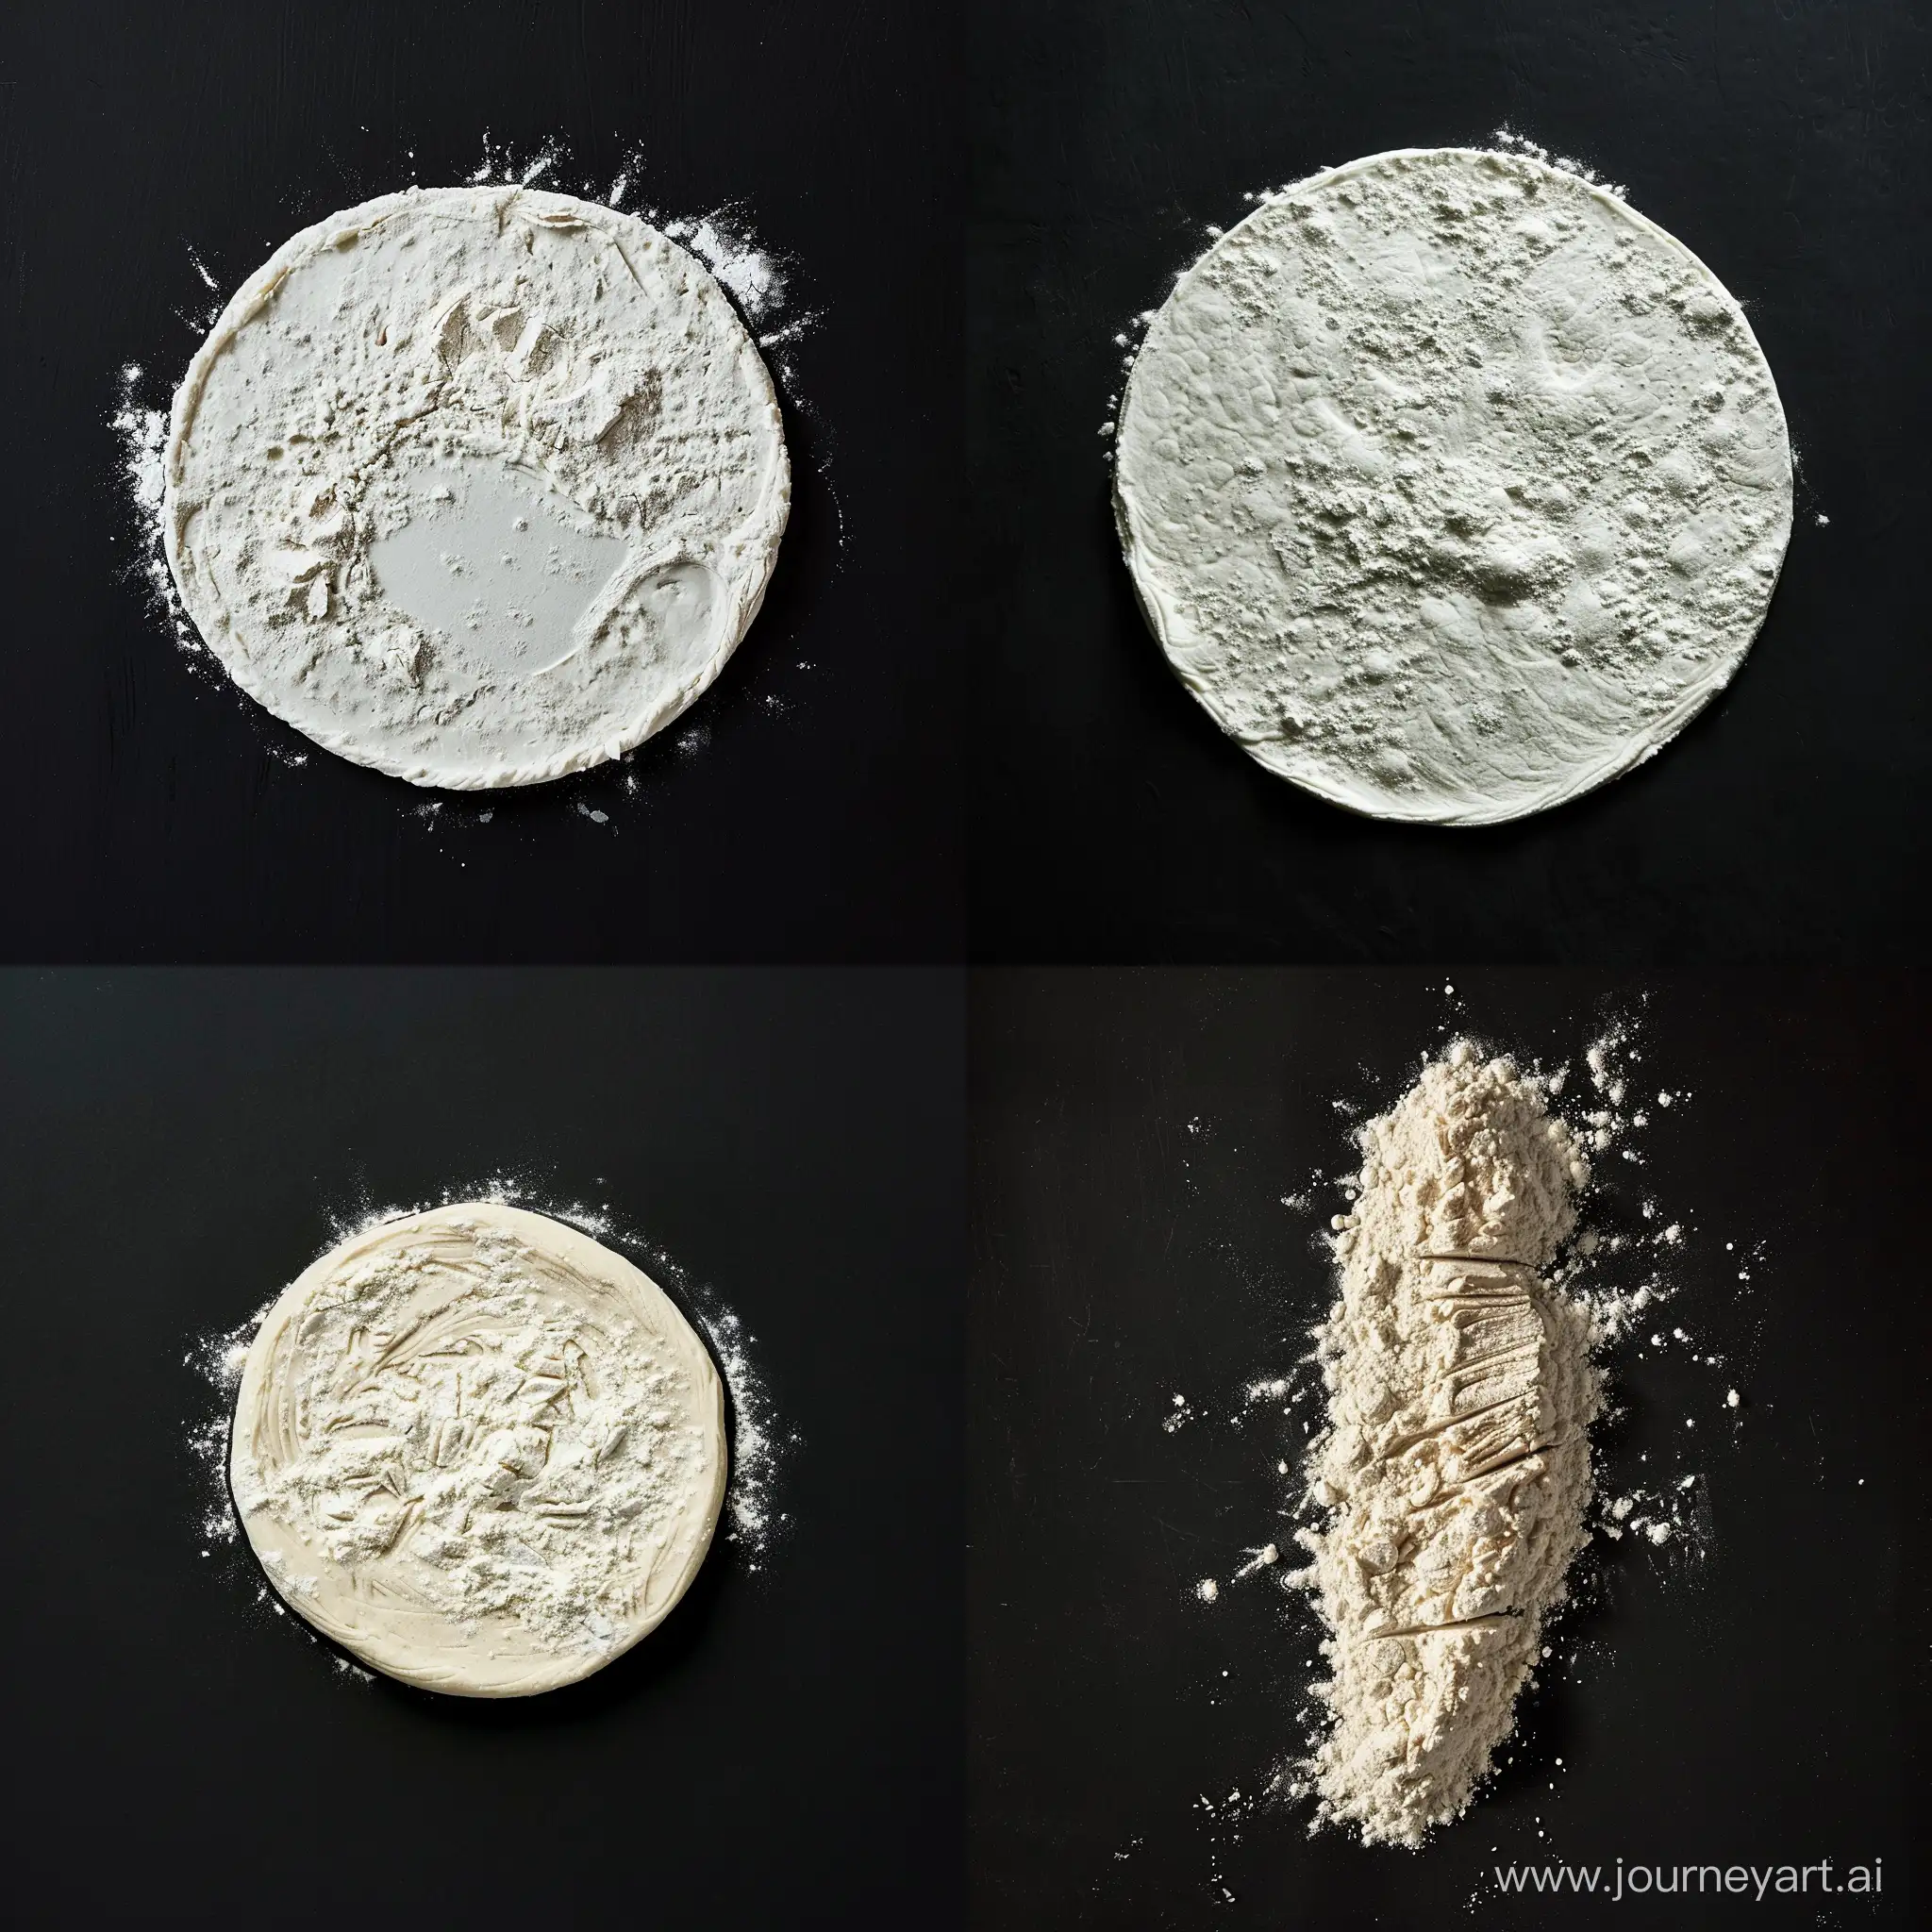 Artistic-Flour-Shaping-on-Black-Background